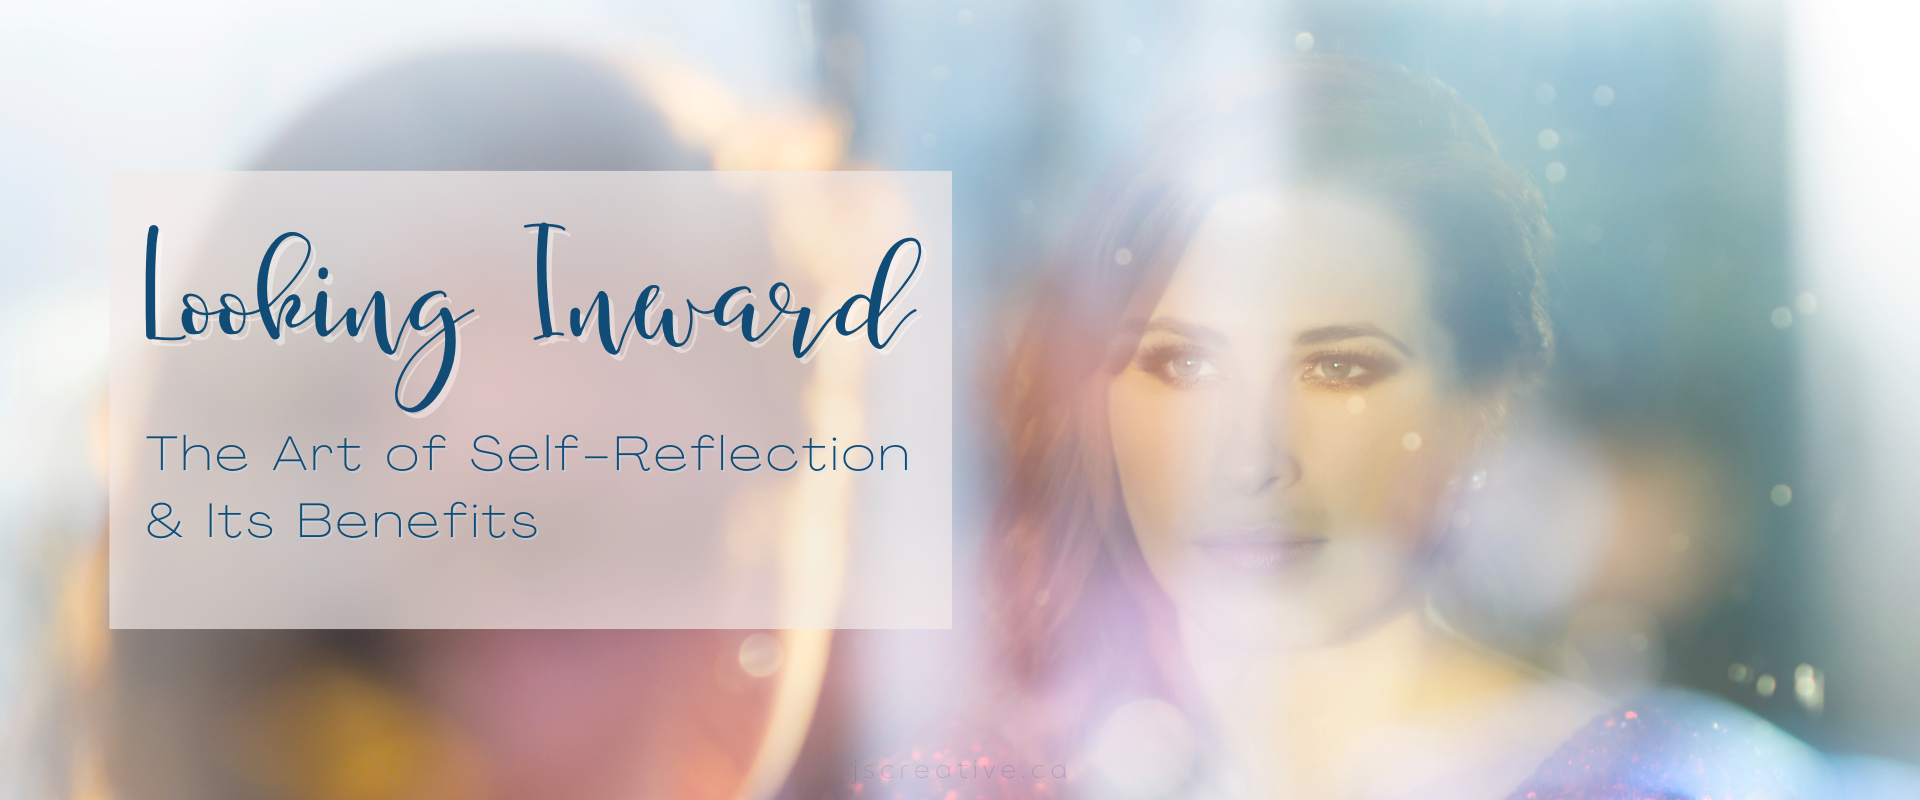 Looking Inward: The Art of Self-Reflection and Its Benefits | jscreative.ca